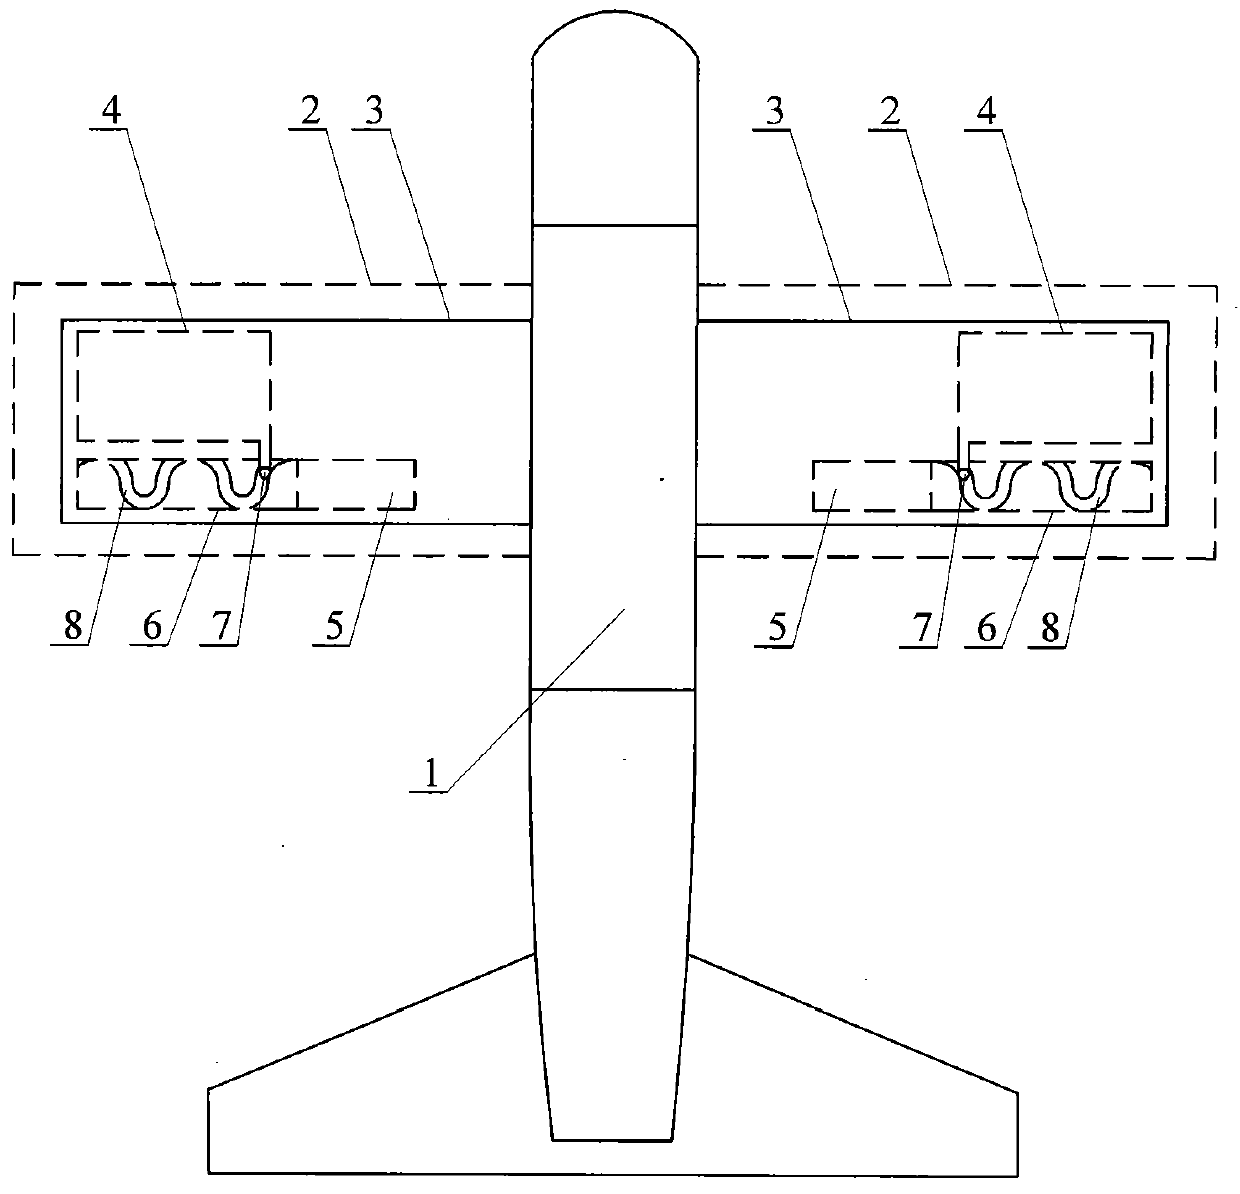 Aircraft with changeable wing shape